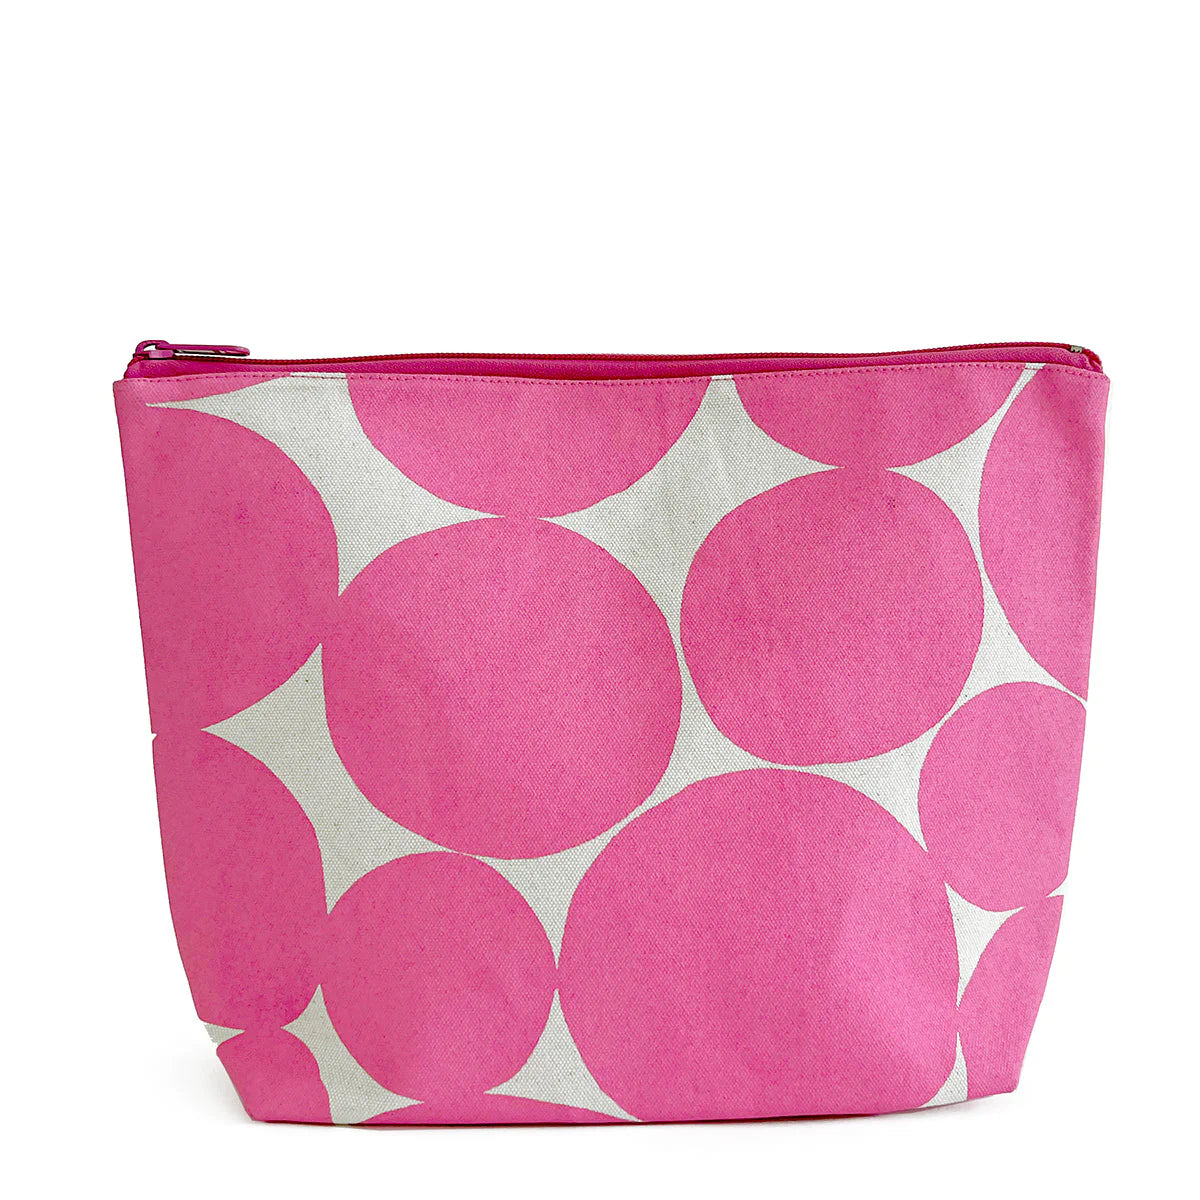 Extra Large Travel Pouch | Large Soft Dot Pink